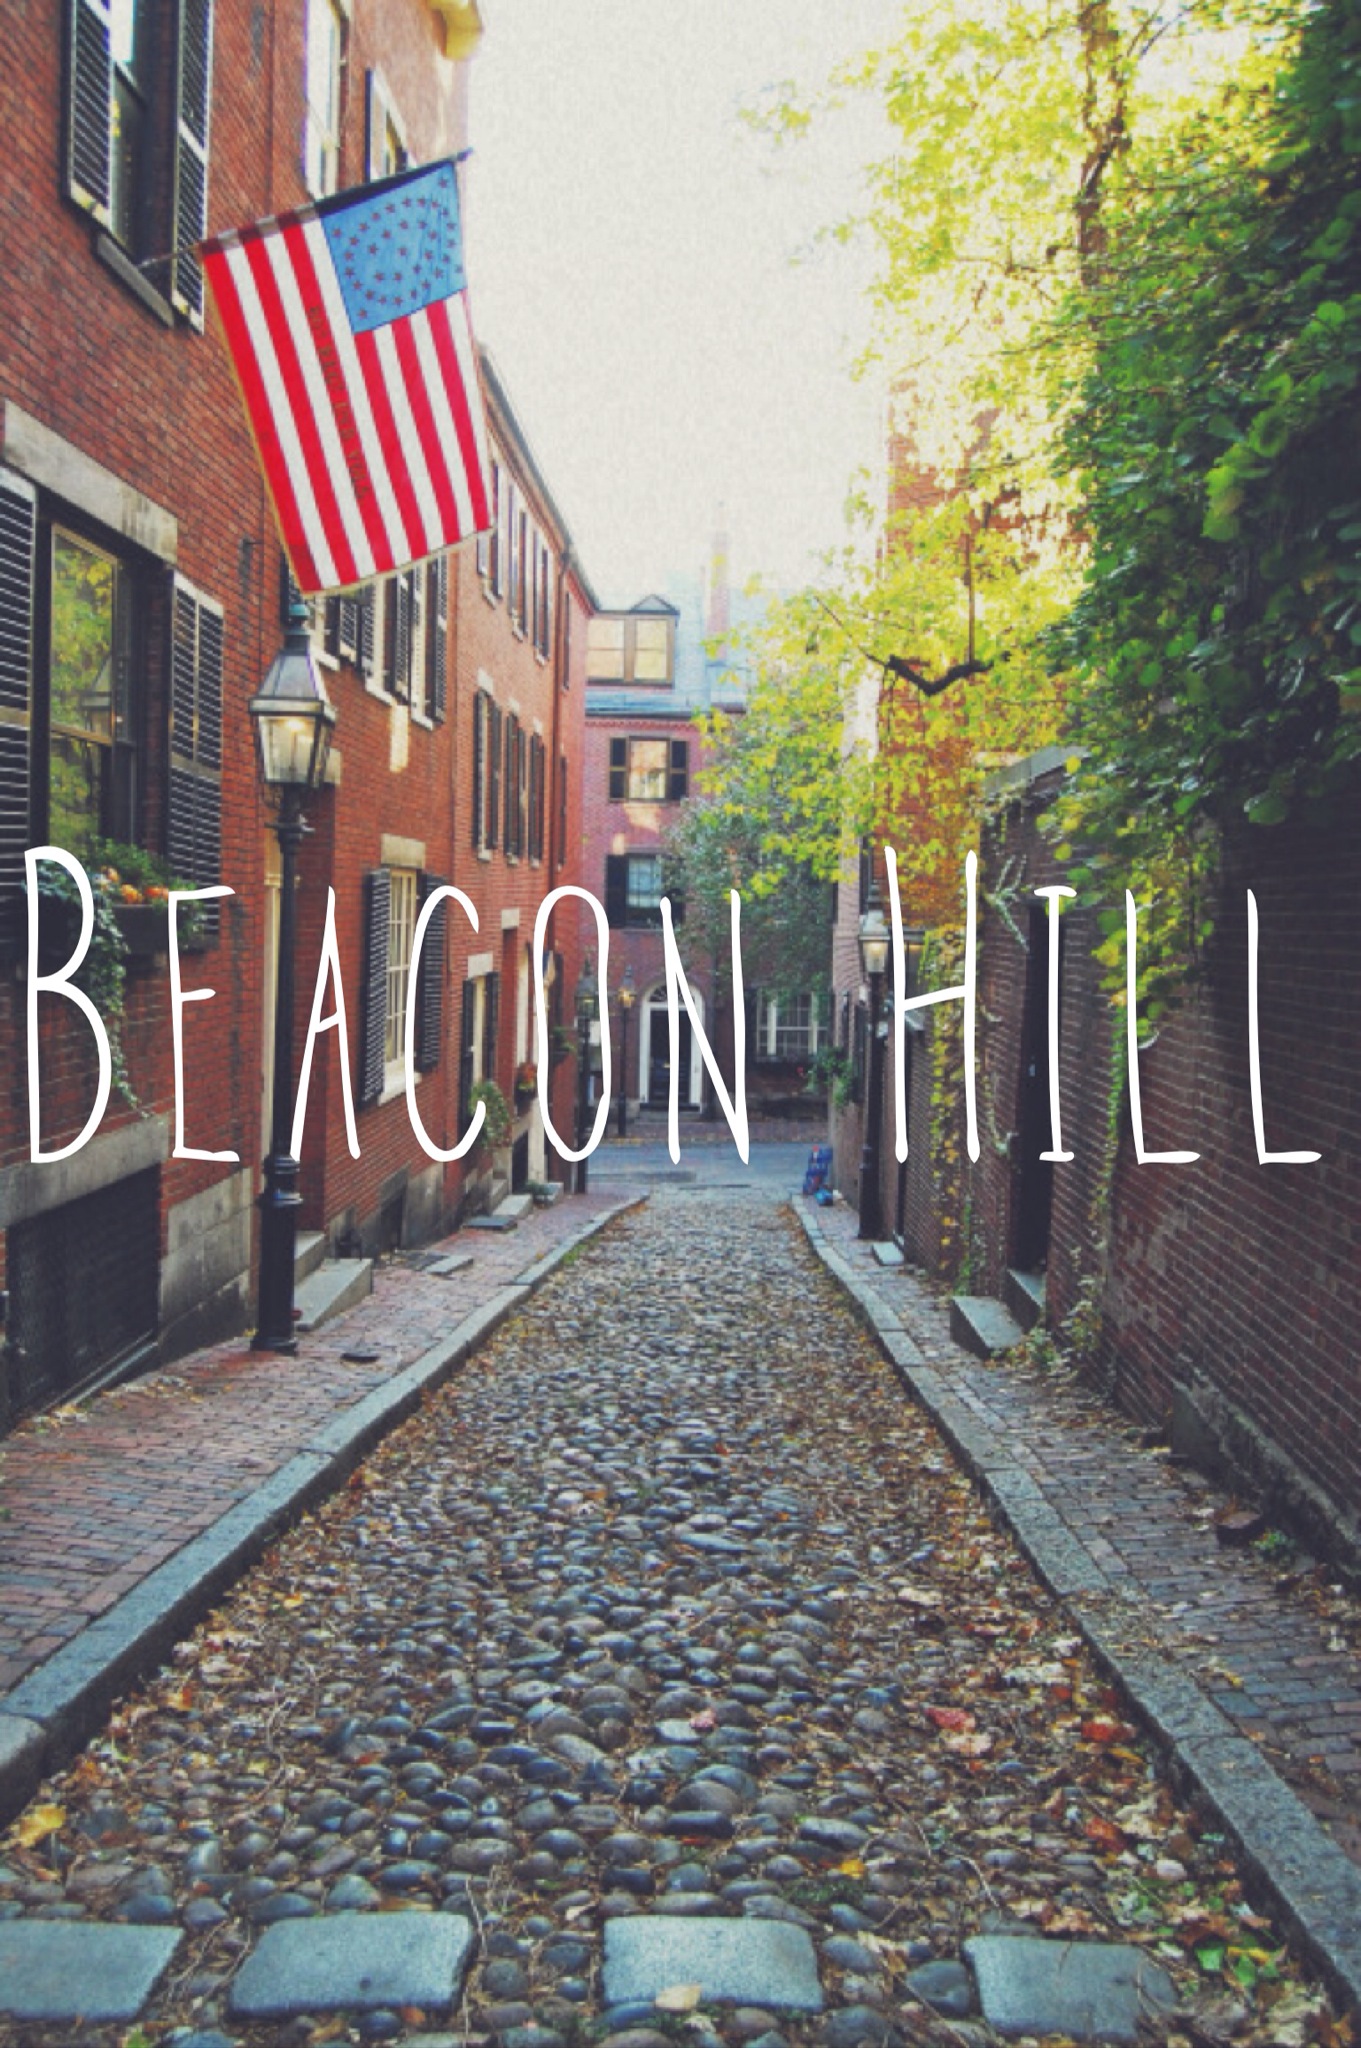 What to do in Beacon Hill